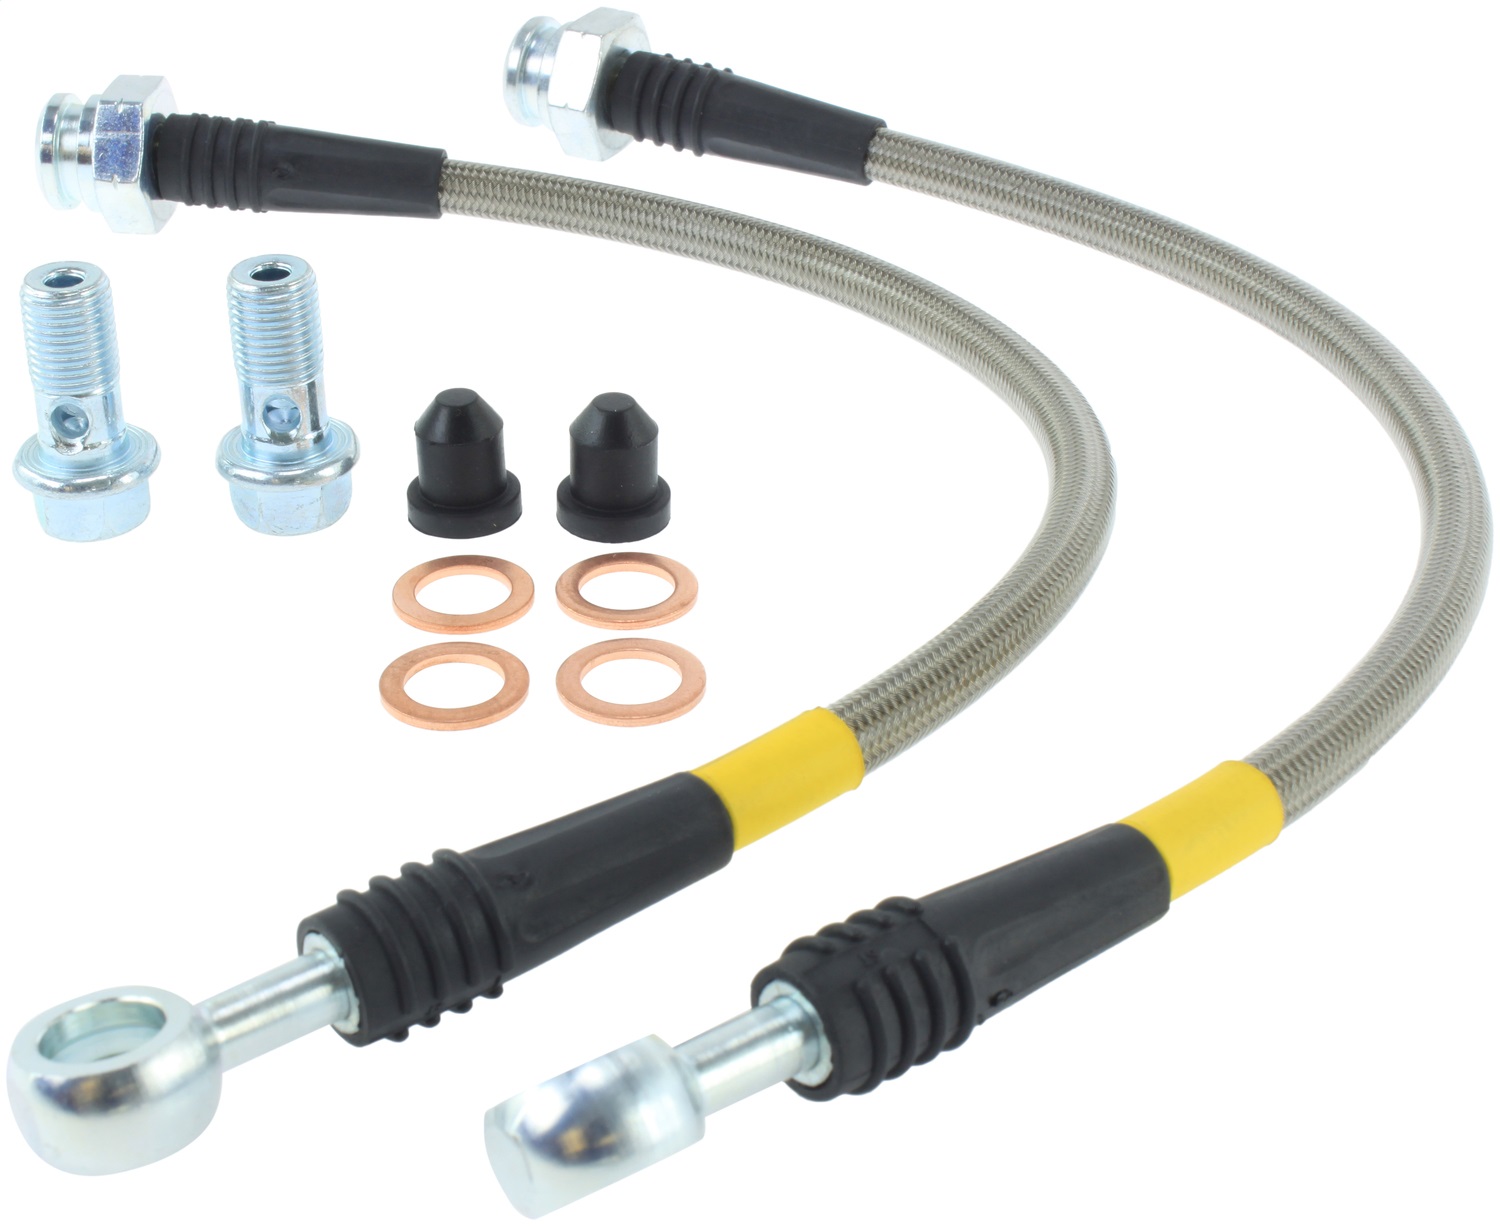 StopTech 950.42507 Stainless Steel Hose Set Fits 89-98 240SX